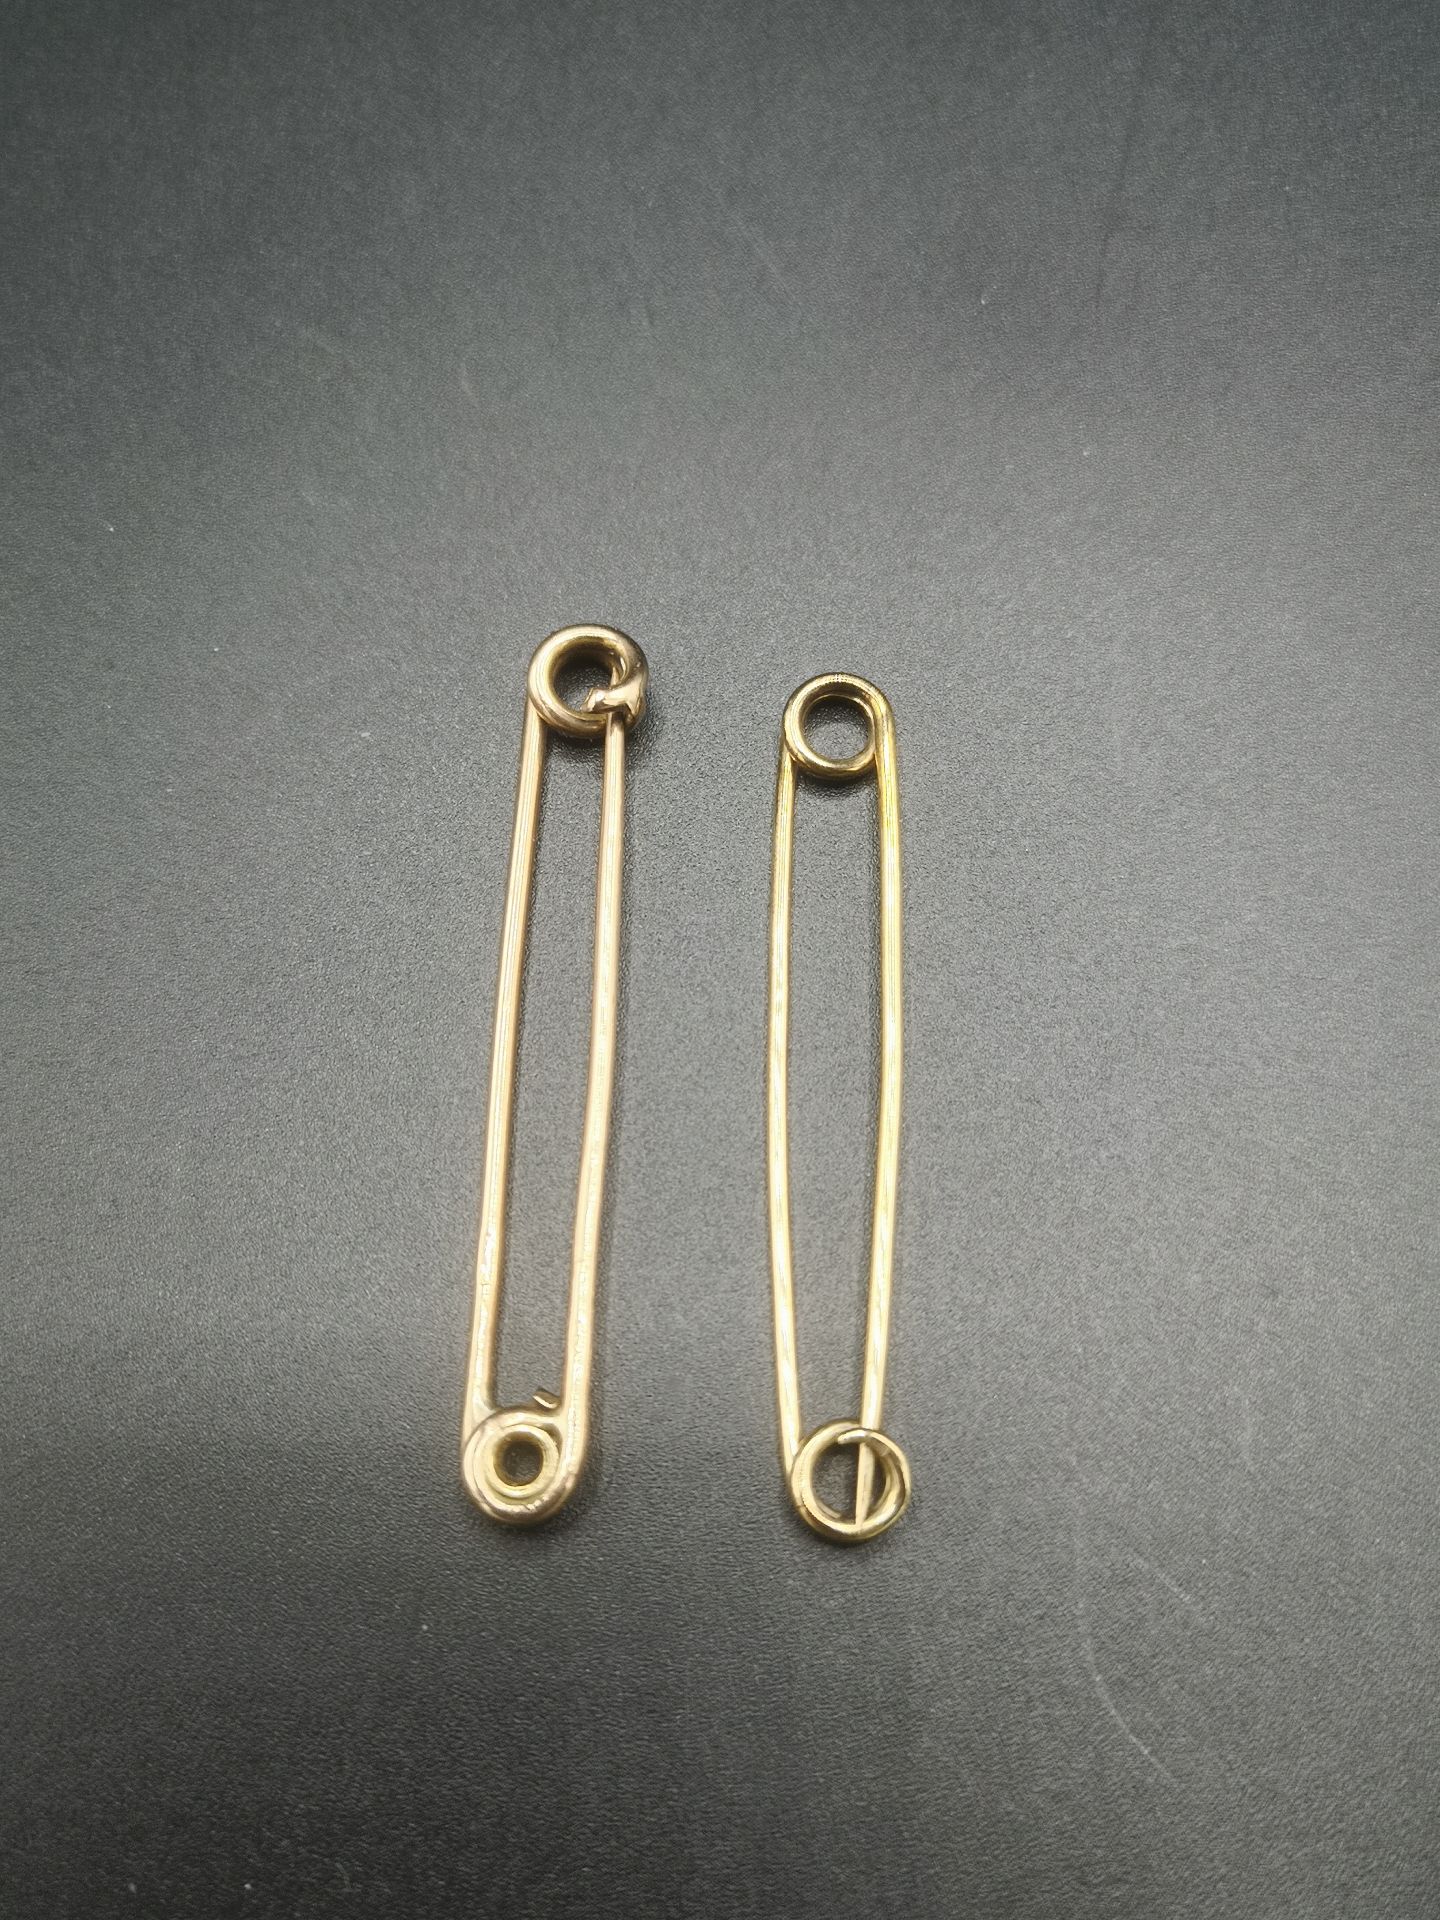 Pair of 9ct gold earrings together with a 9ct gold safety pin - Image 3 of 4